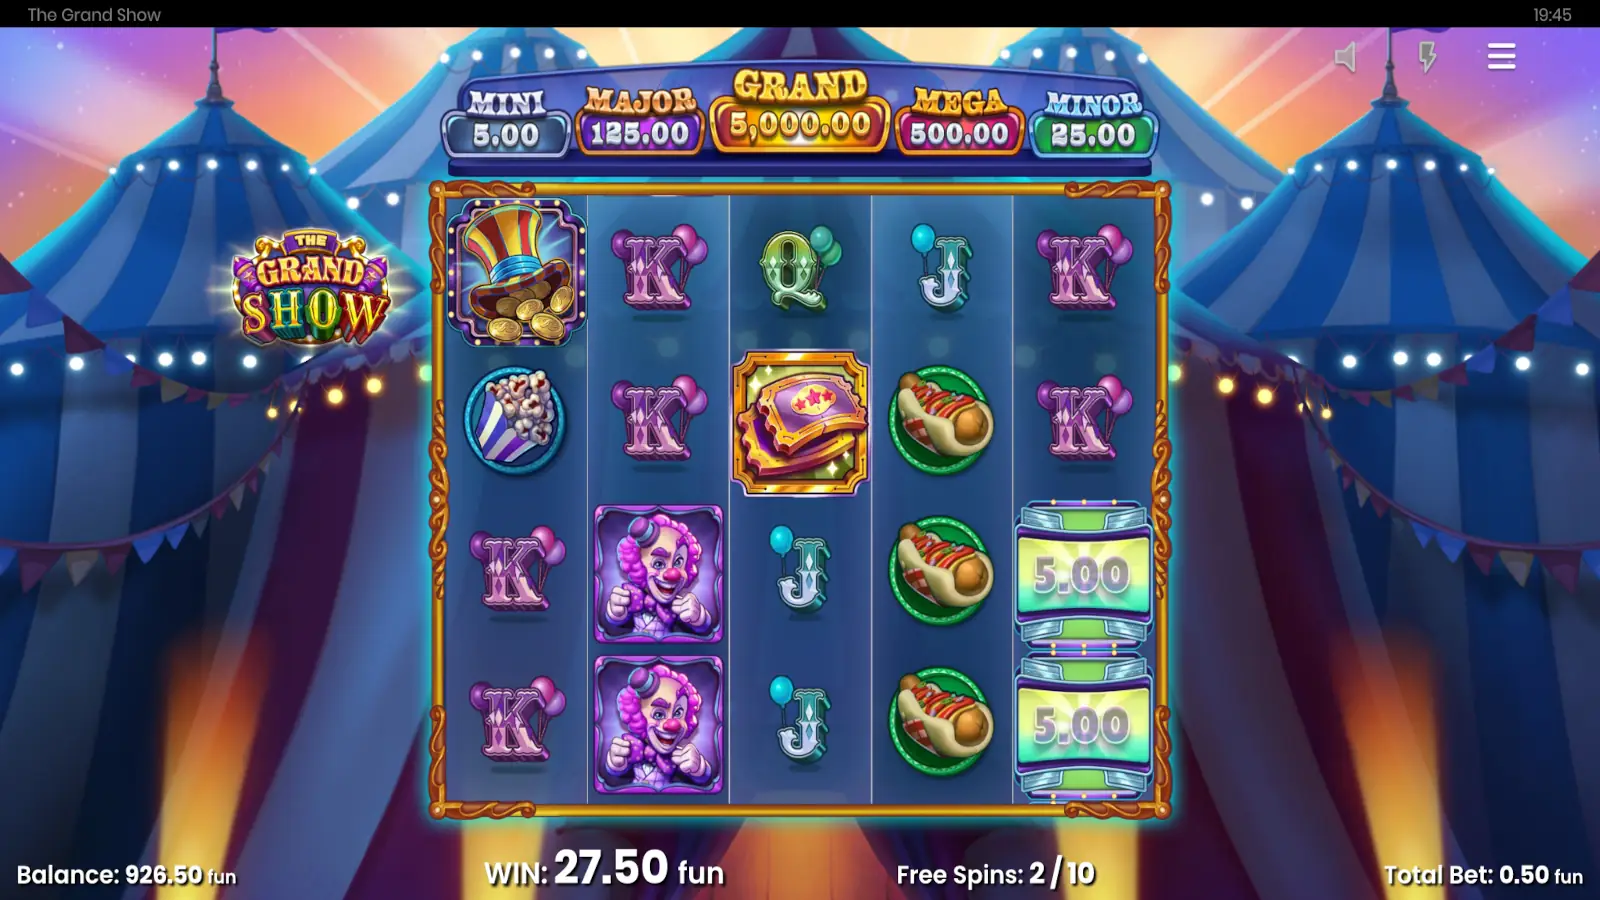 The Grand Show Slot Free Spins